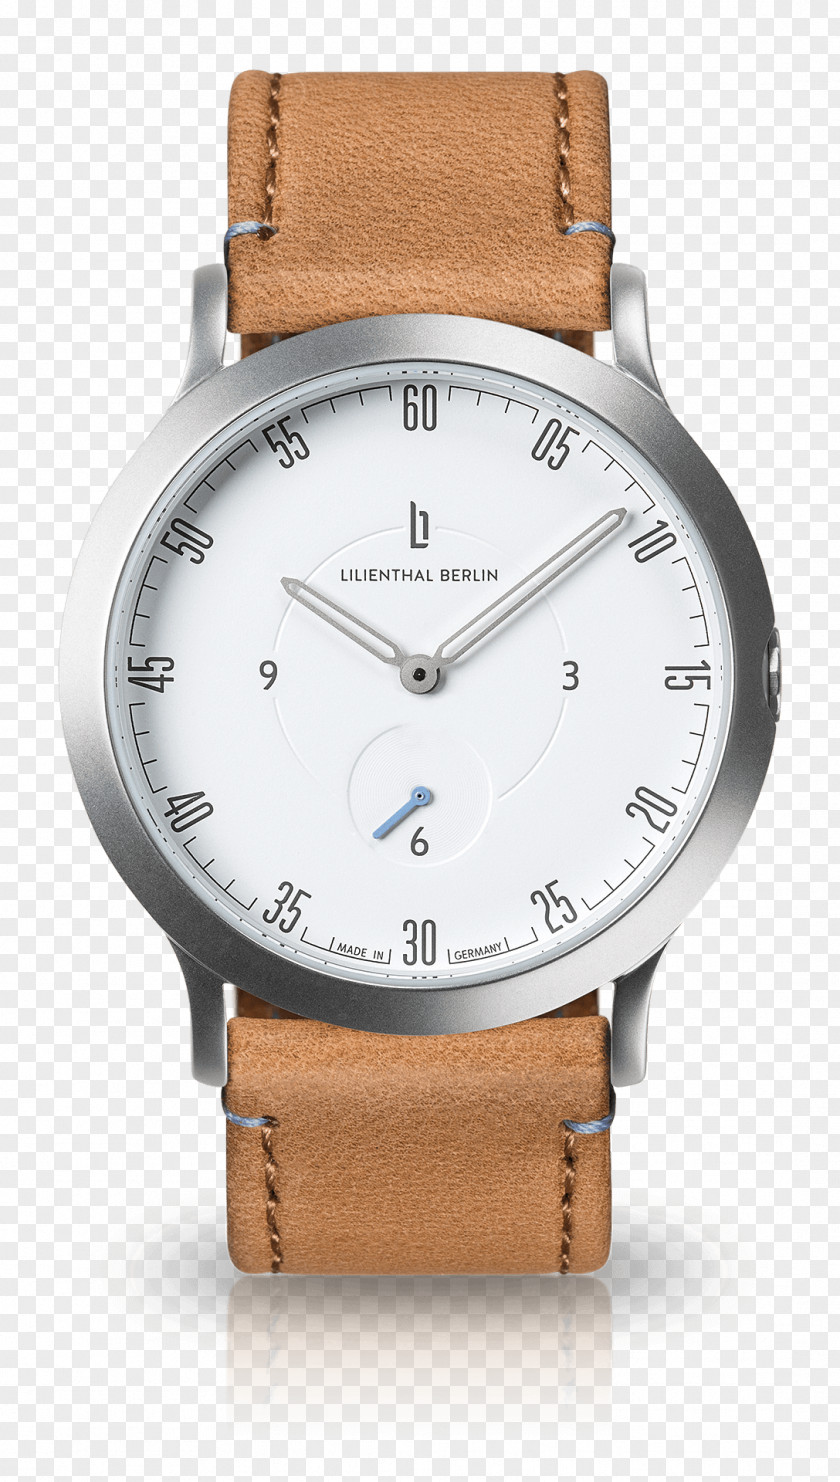 Watch Lilienthal Berlin Jewellery Mondaine Clothing Accessories PNG